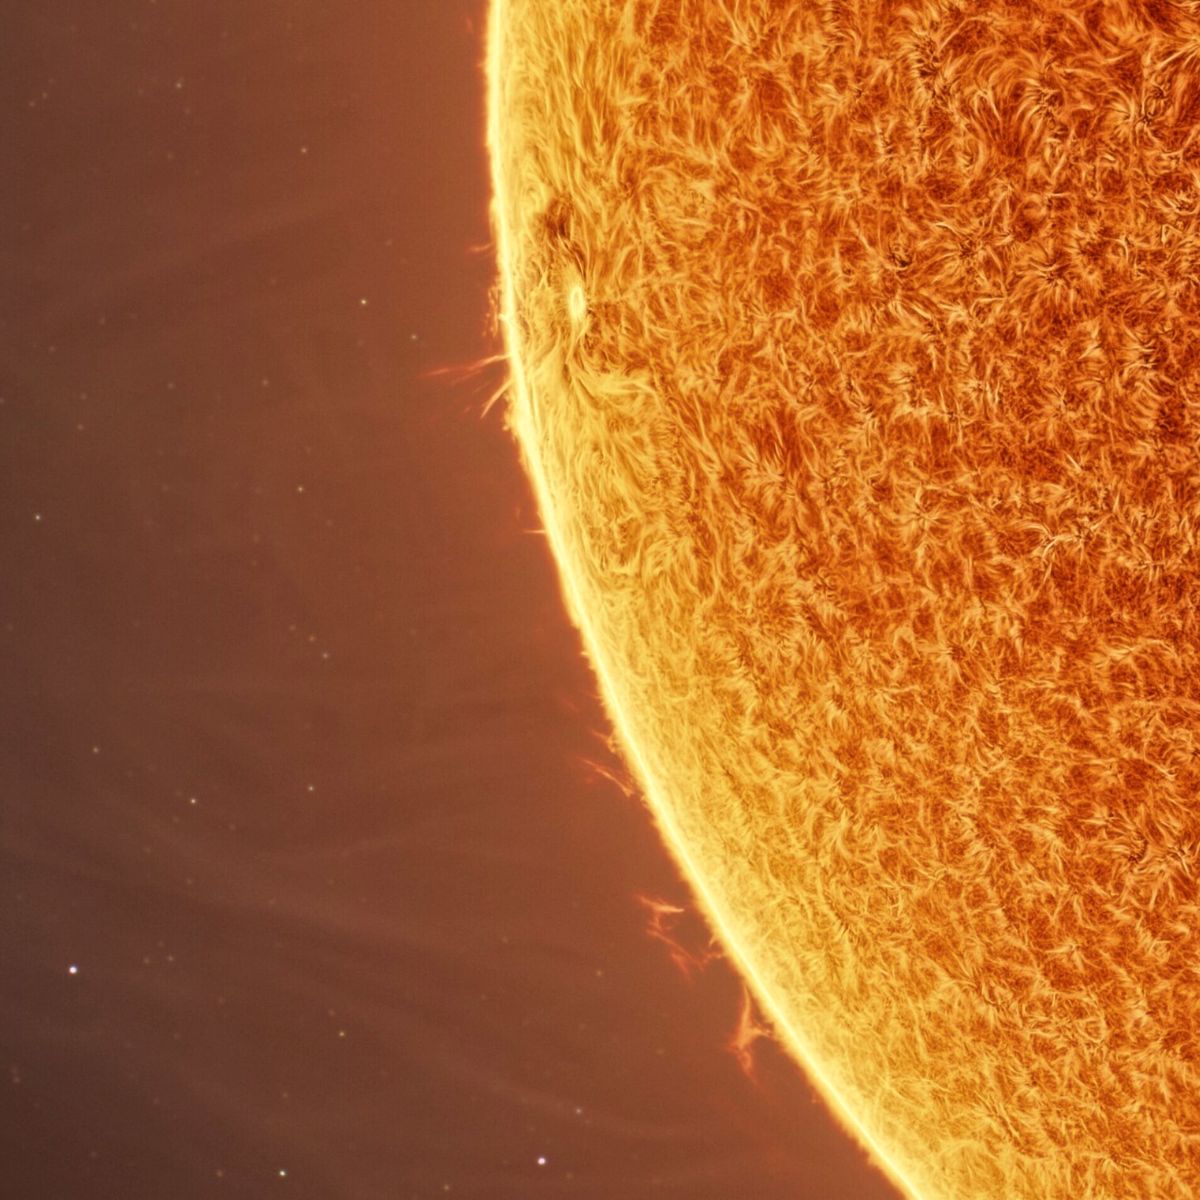 Closeup of suns strands and heat